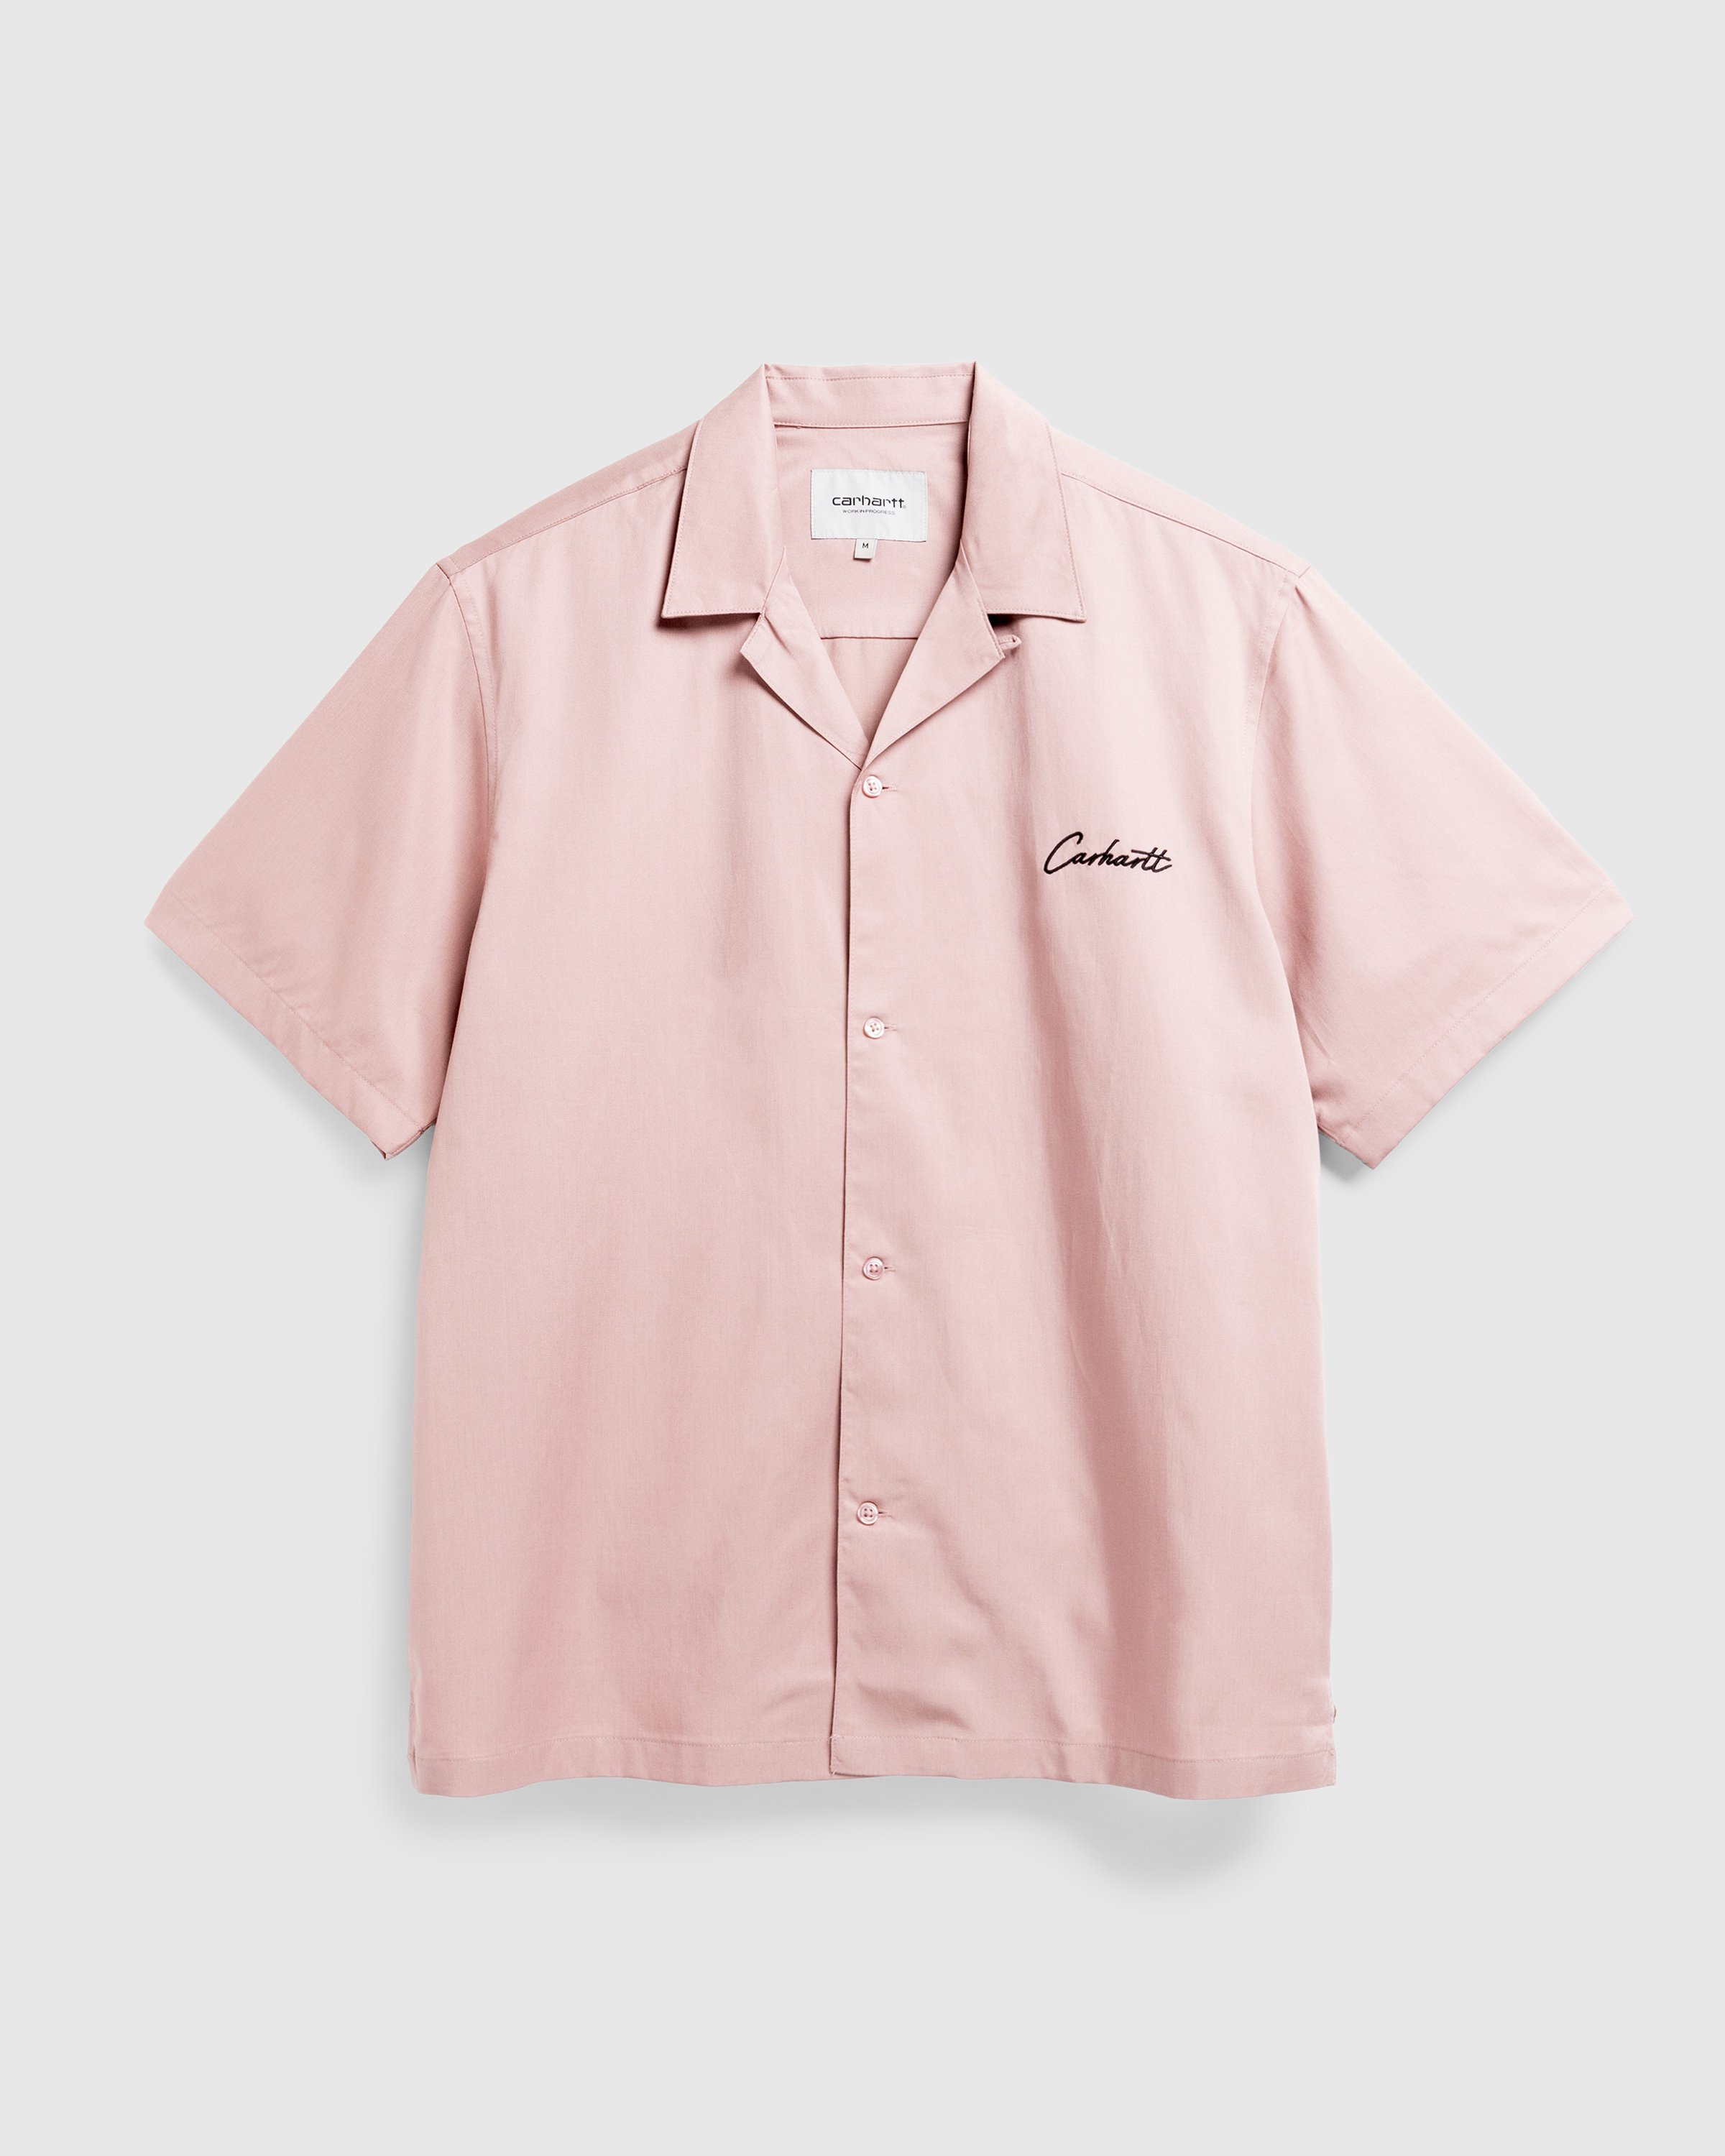 Carhartt WIP - S/S Delray Shirt Glassy Pink / Black - Clothing - Pink - Image 1